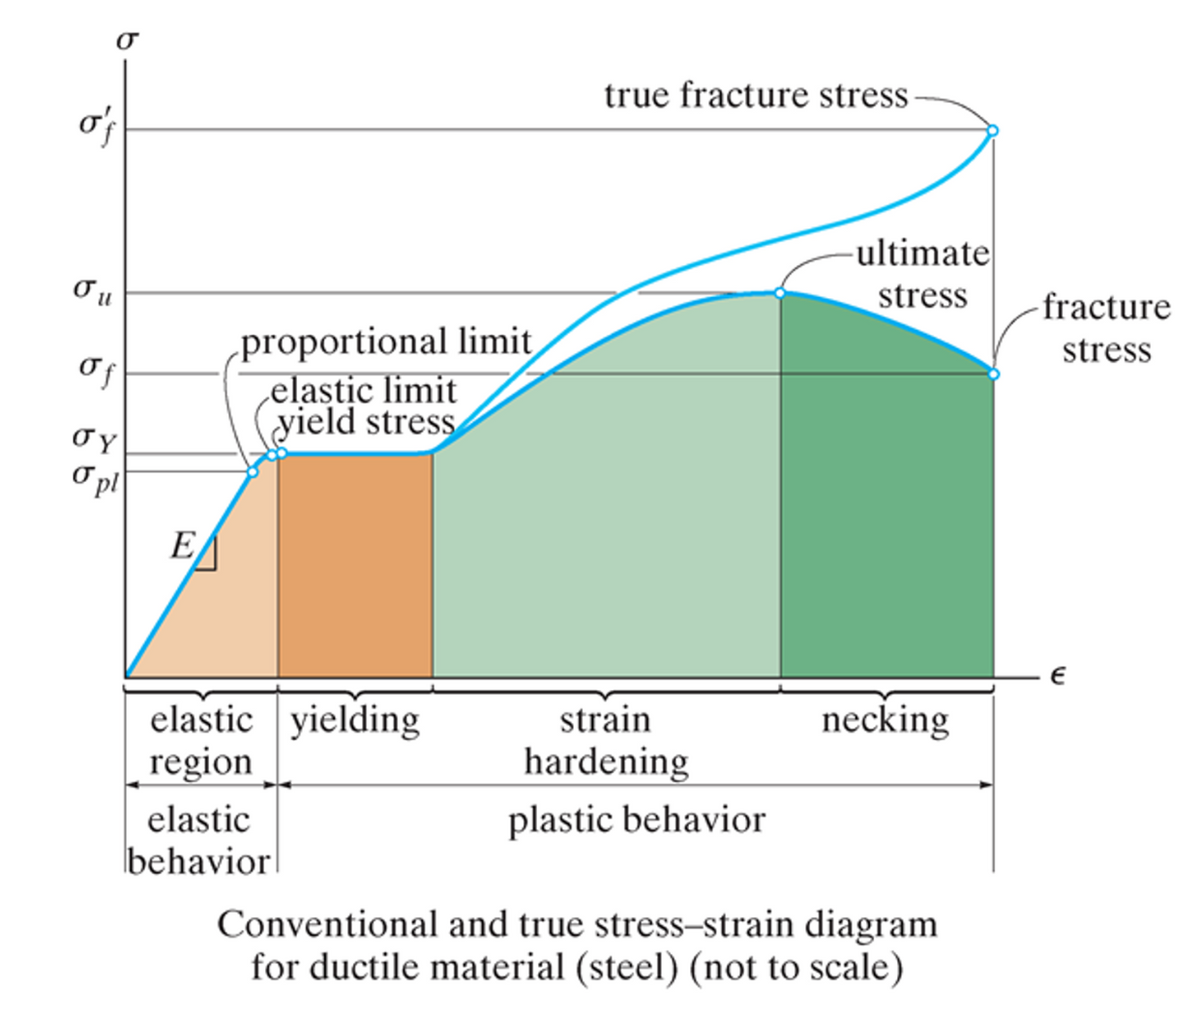 b
o'f
σu
of
σY
Opl
E
proportional limit
elastic limit
yield stress
elastic yielding
region
elastic
behavior
true fracture stress-
strain
hardening
plastic behavior
-ultimate
stress
necking
Conventional and true stress-strain diagram
for ductile material (steel) (not to scale)
fracture
stress
€